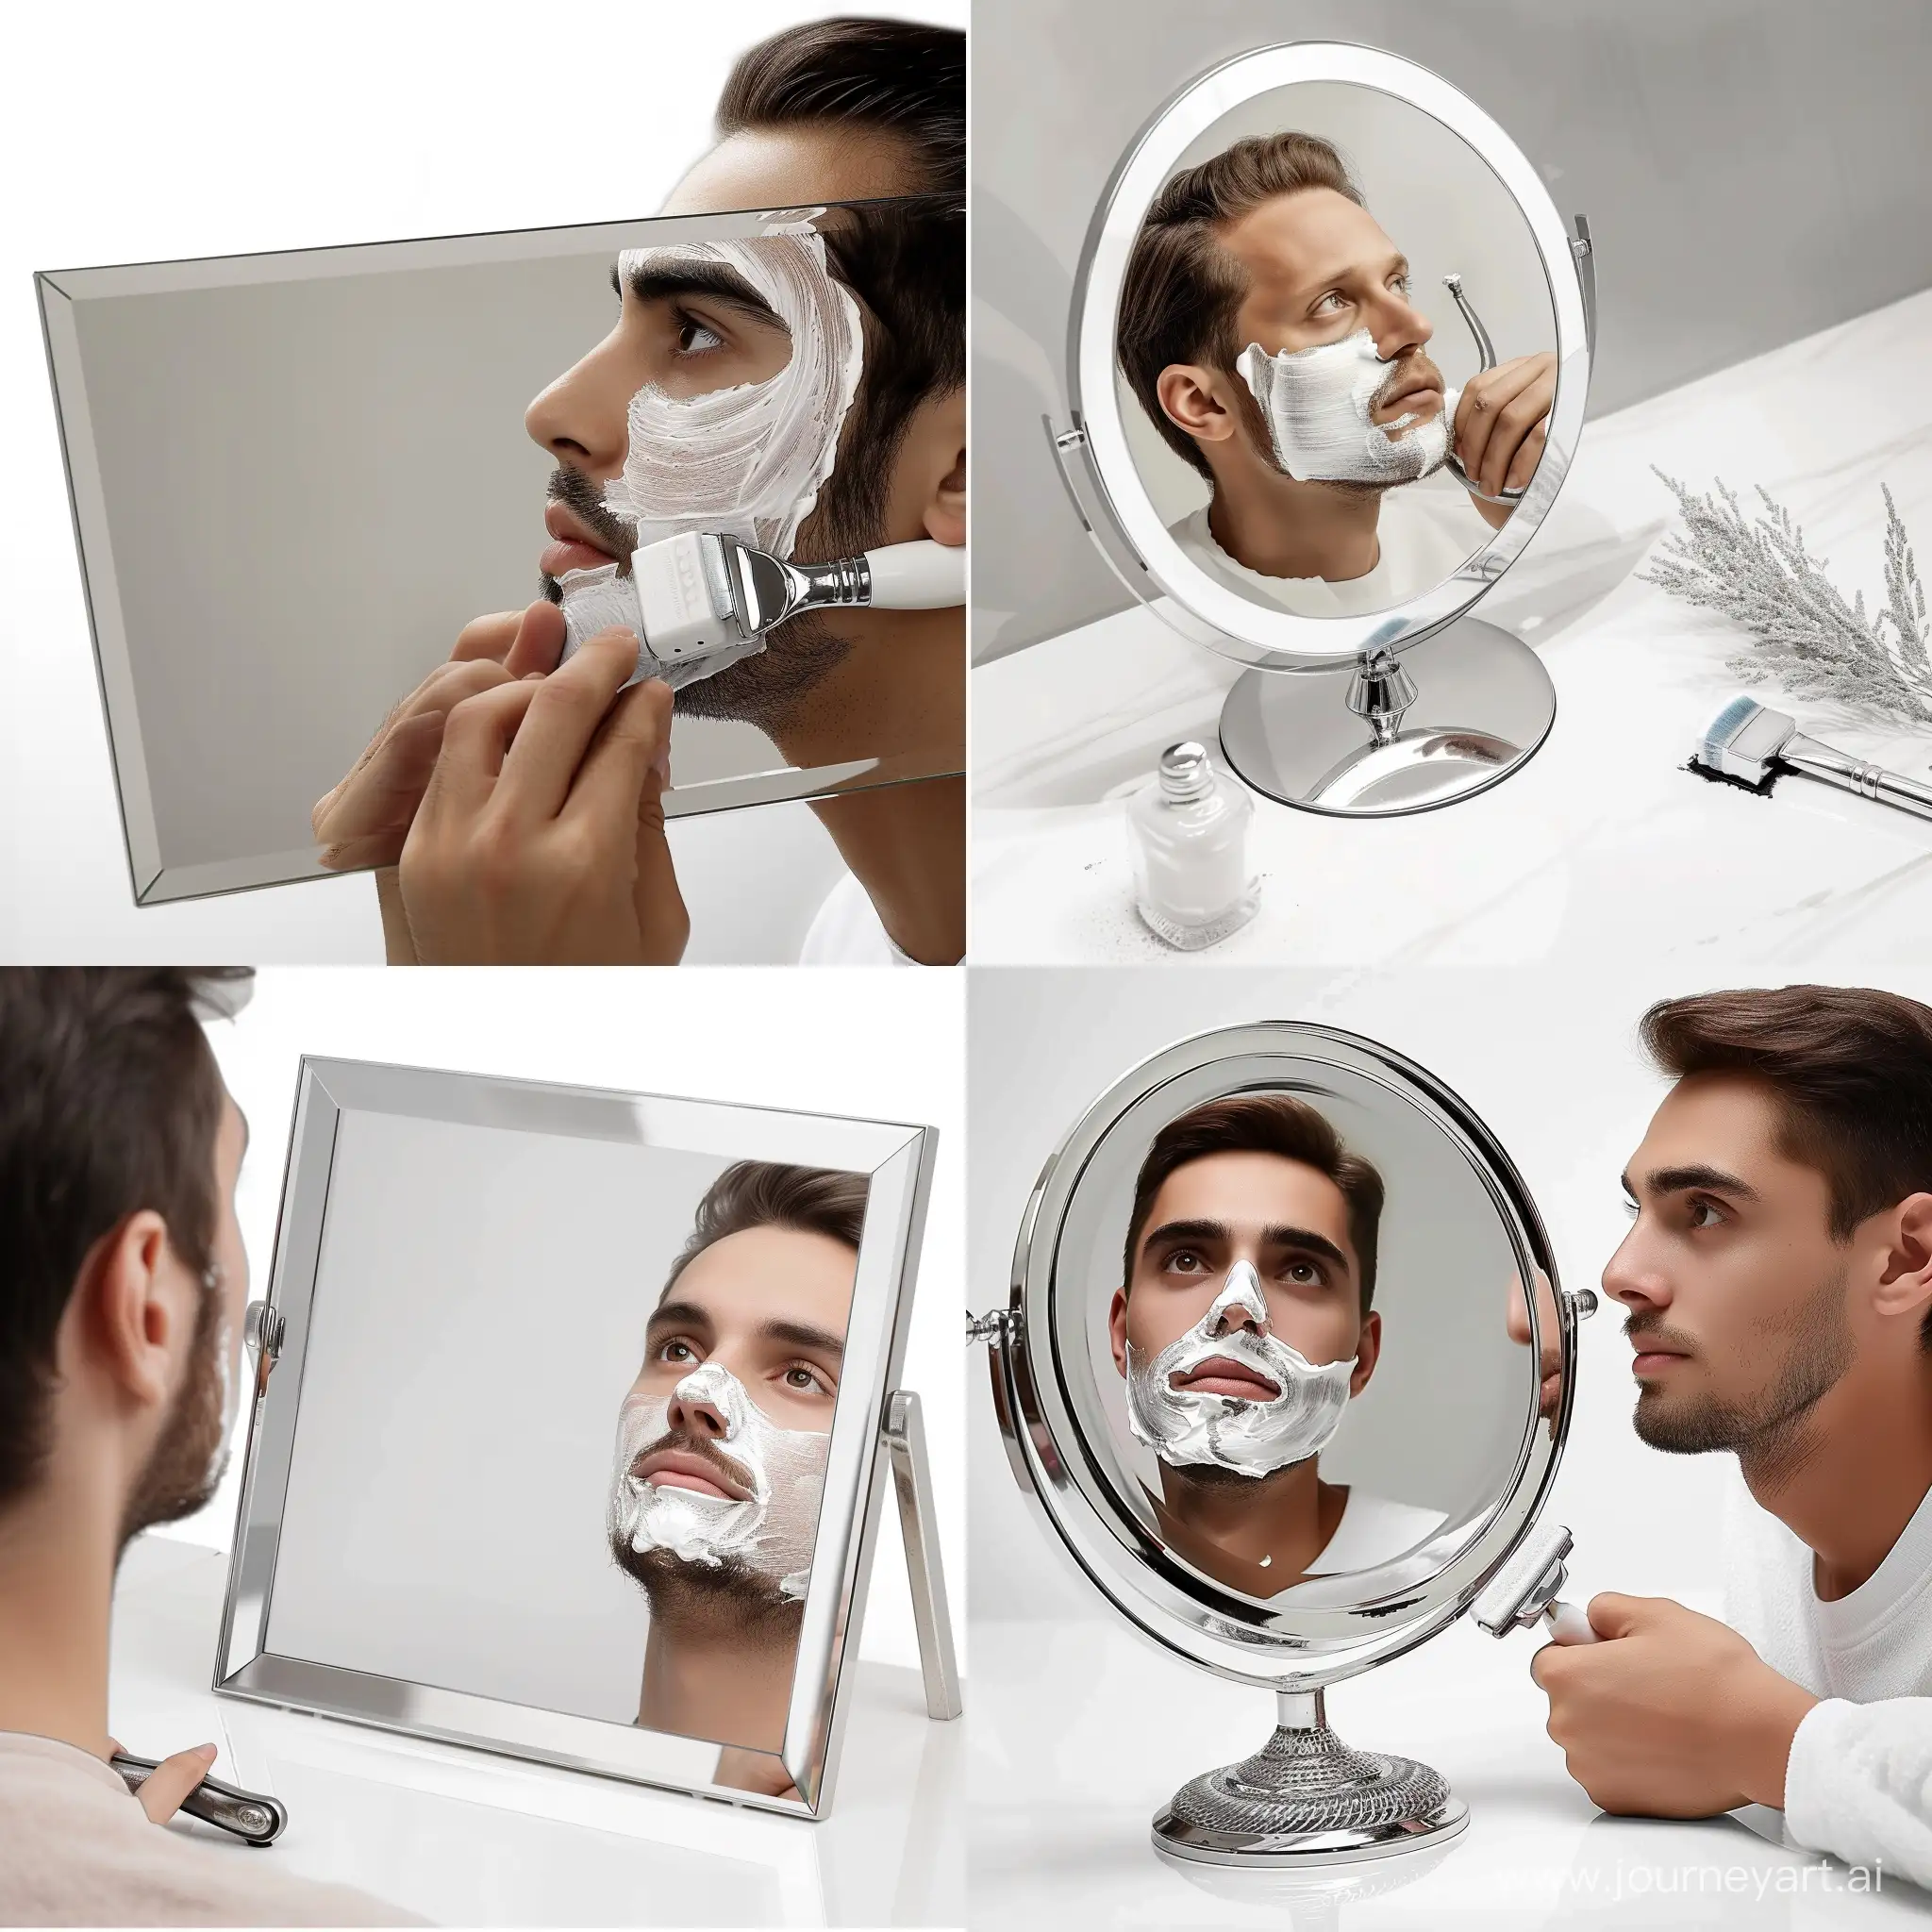 Precision-Grooming-Realistic-Man-Shaving-Reflection-on-White-Background